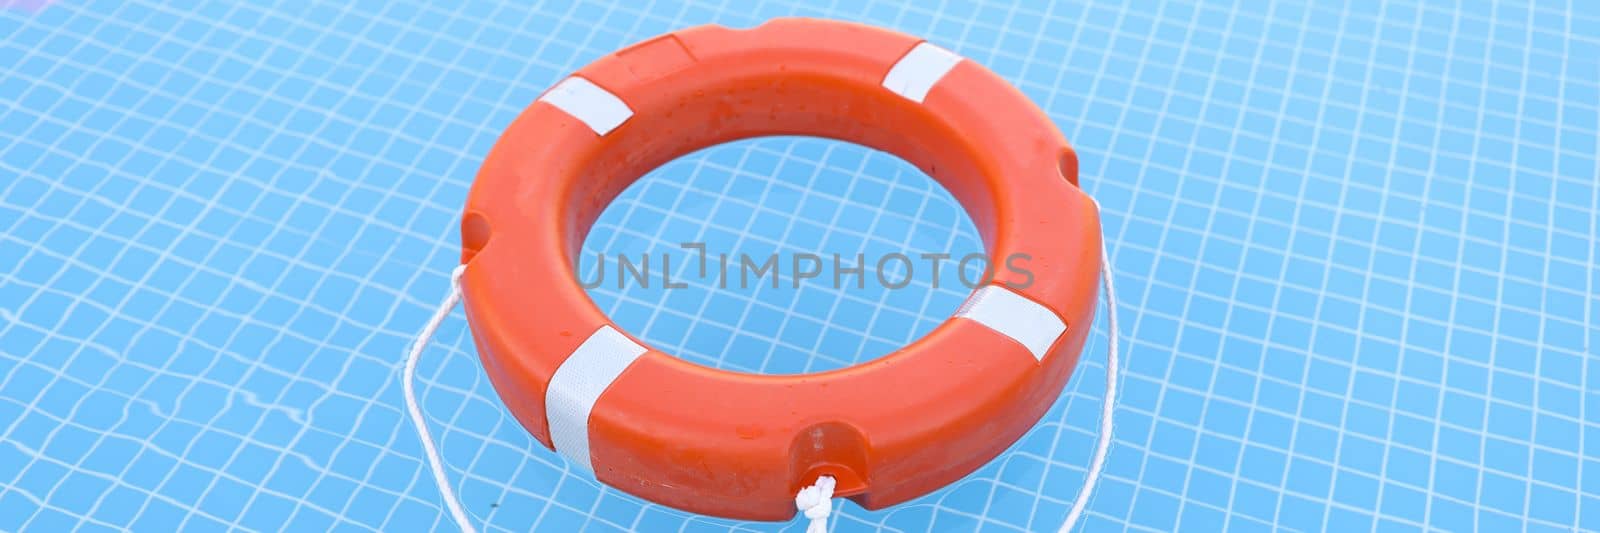 Lifebuoy on blue water with sun glare closeup by kuprevich